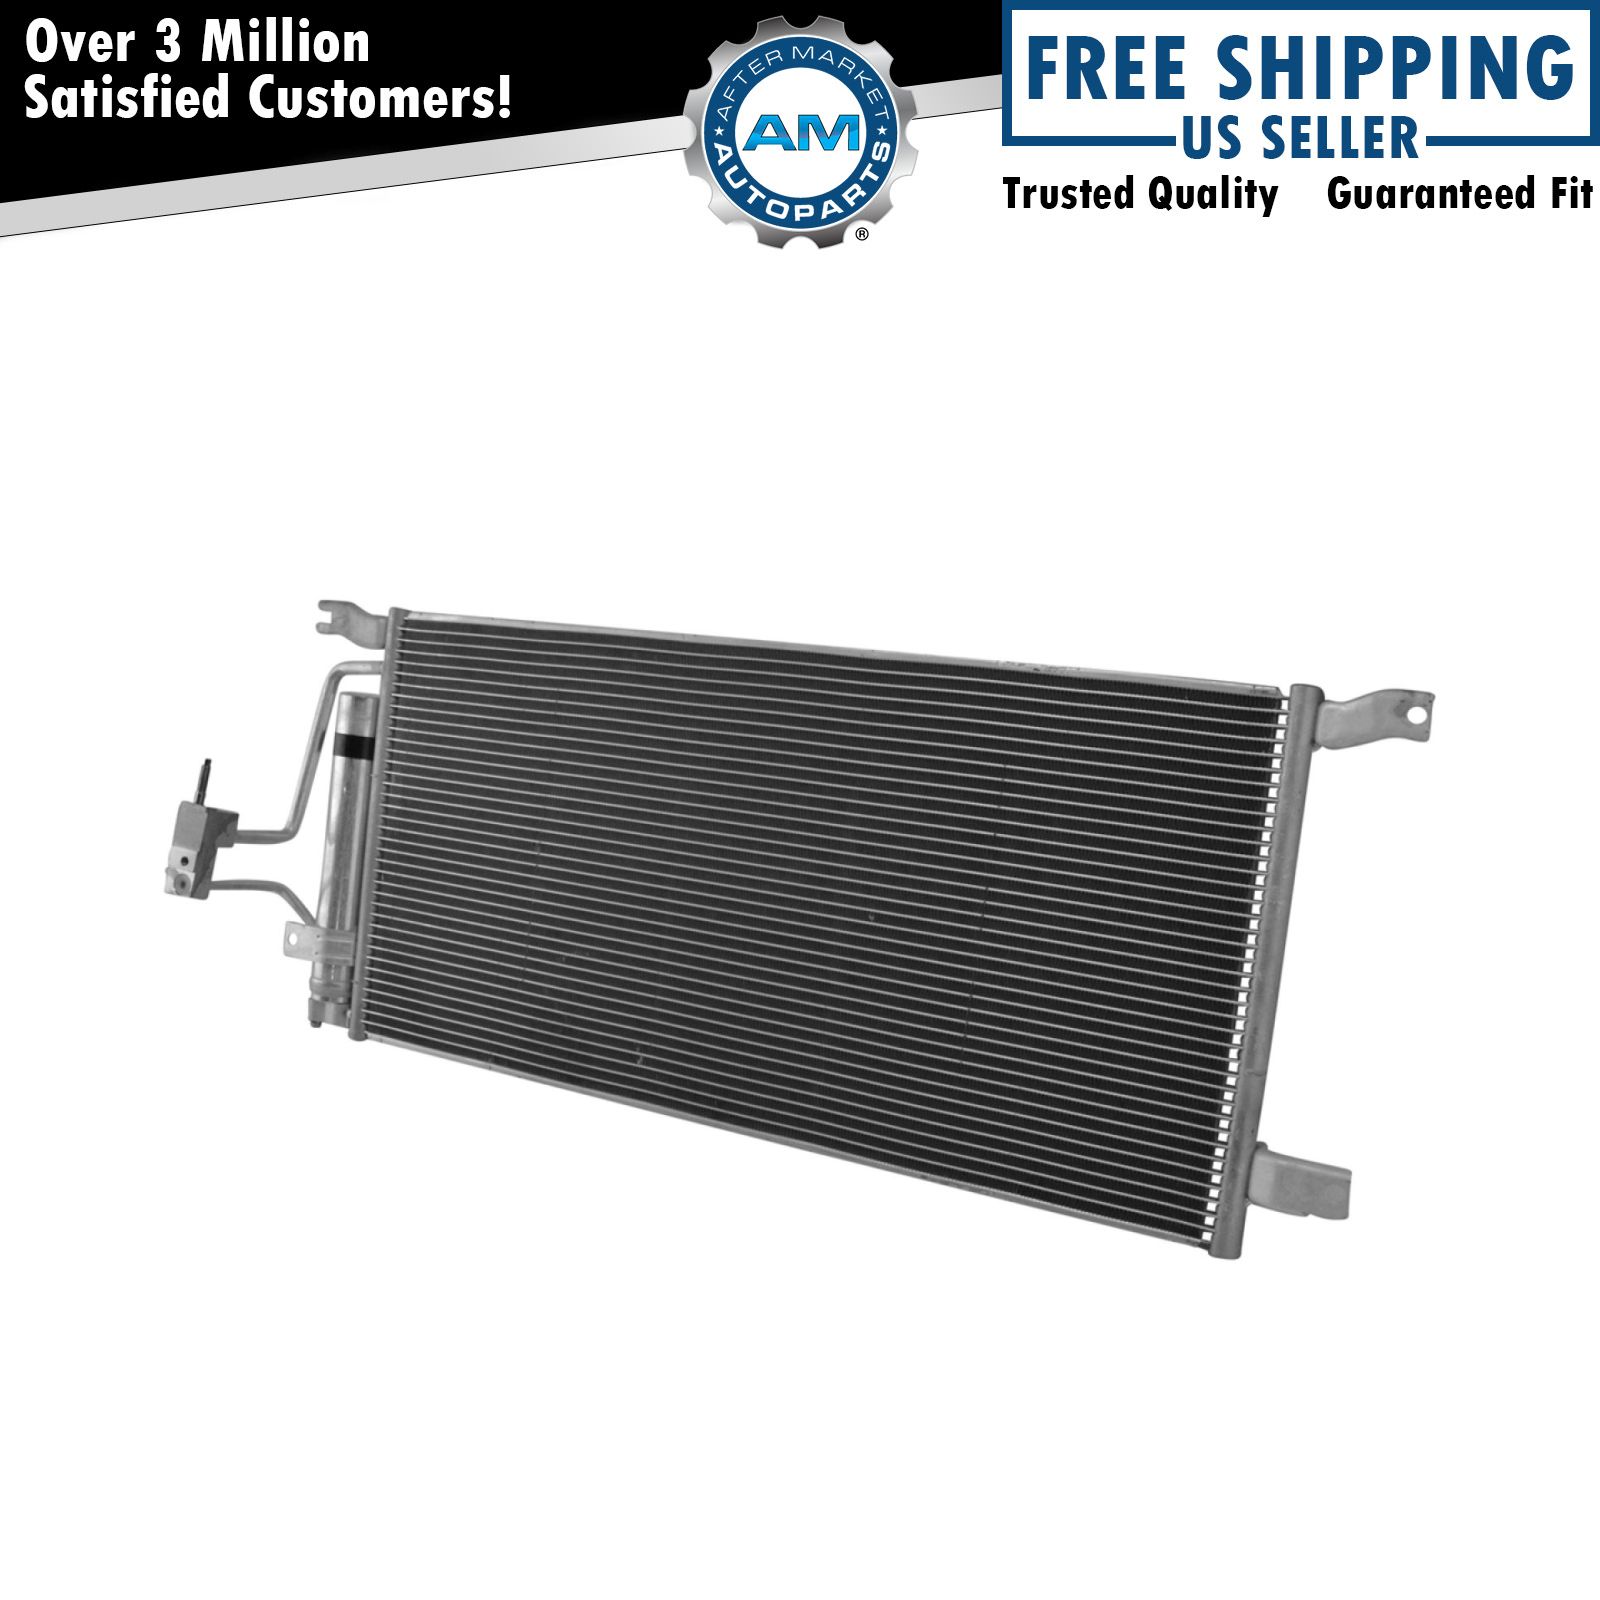 AC Condenser A/C Air Conditioning with Receiver Drier for GM SUV Truck New